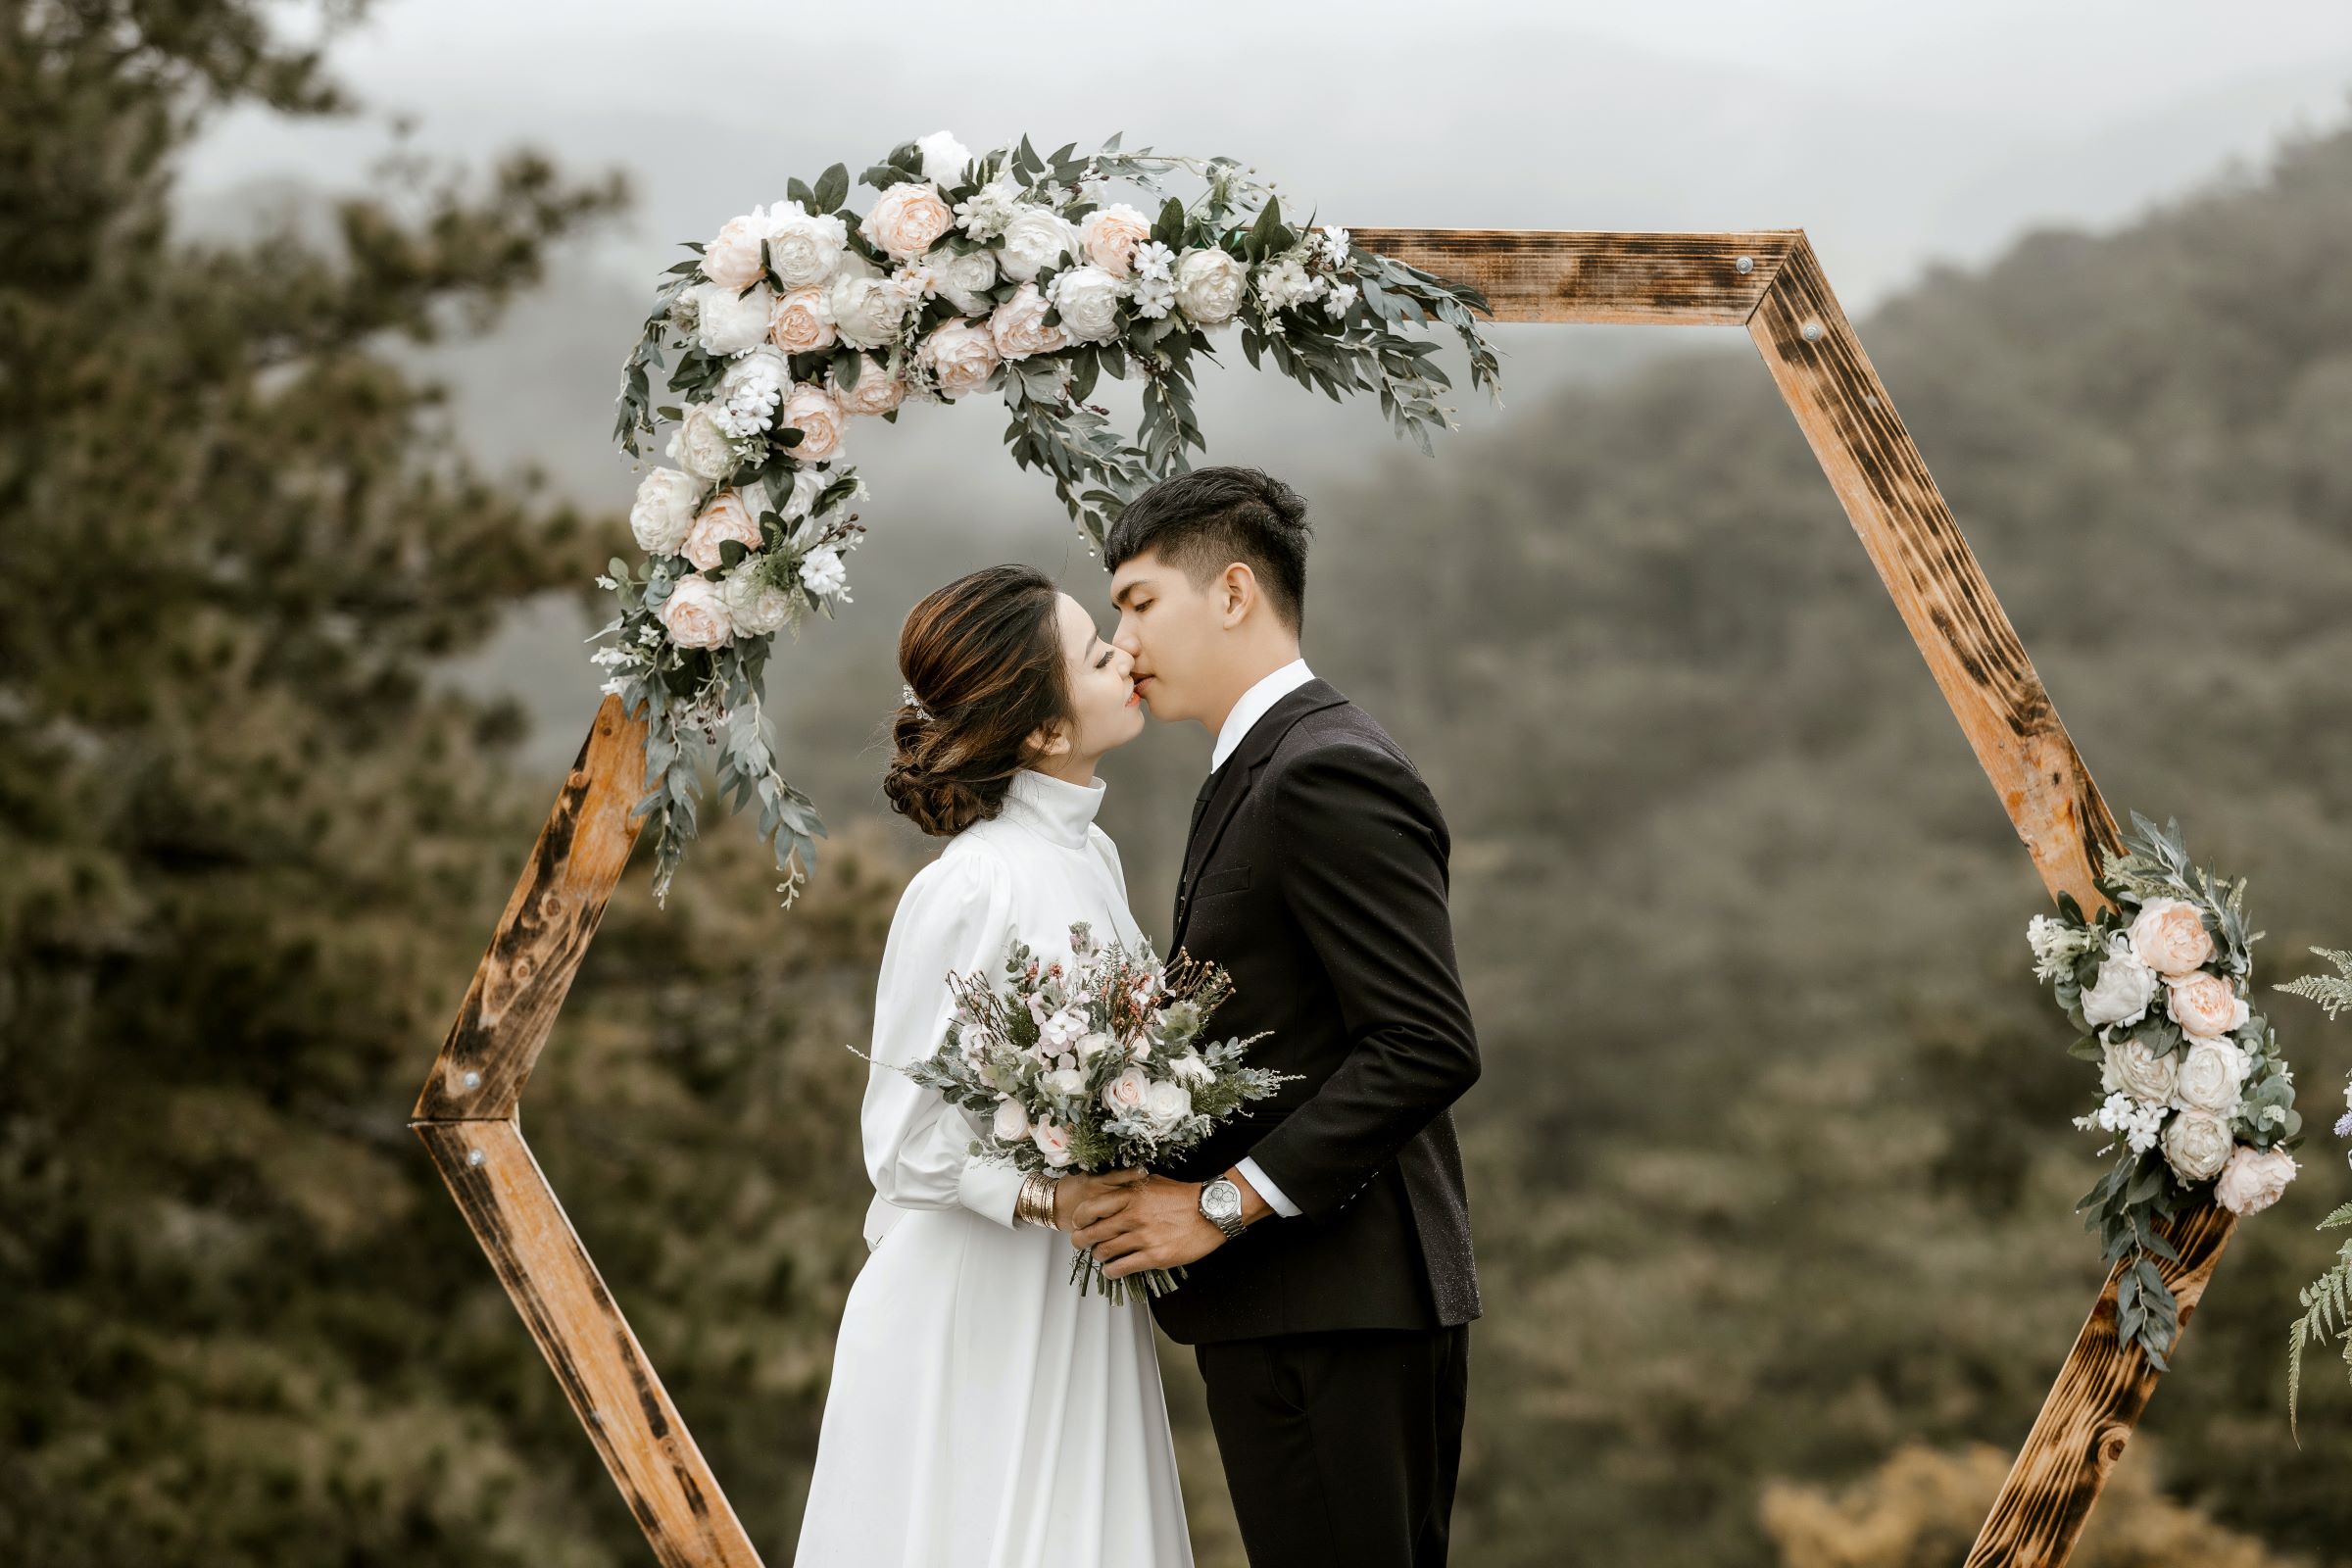 A groom and bride kissing. | Source: Pexels